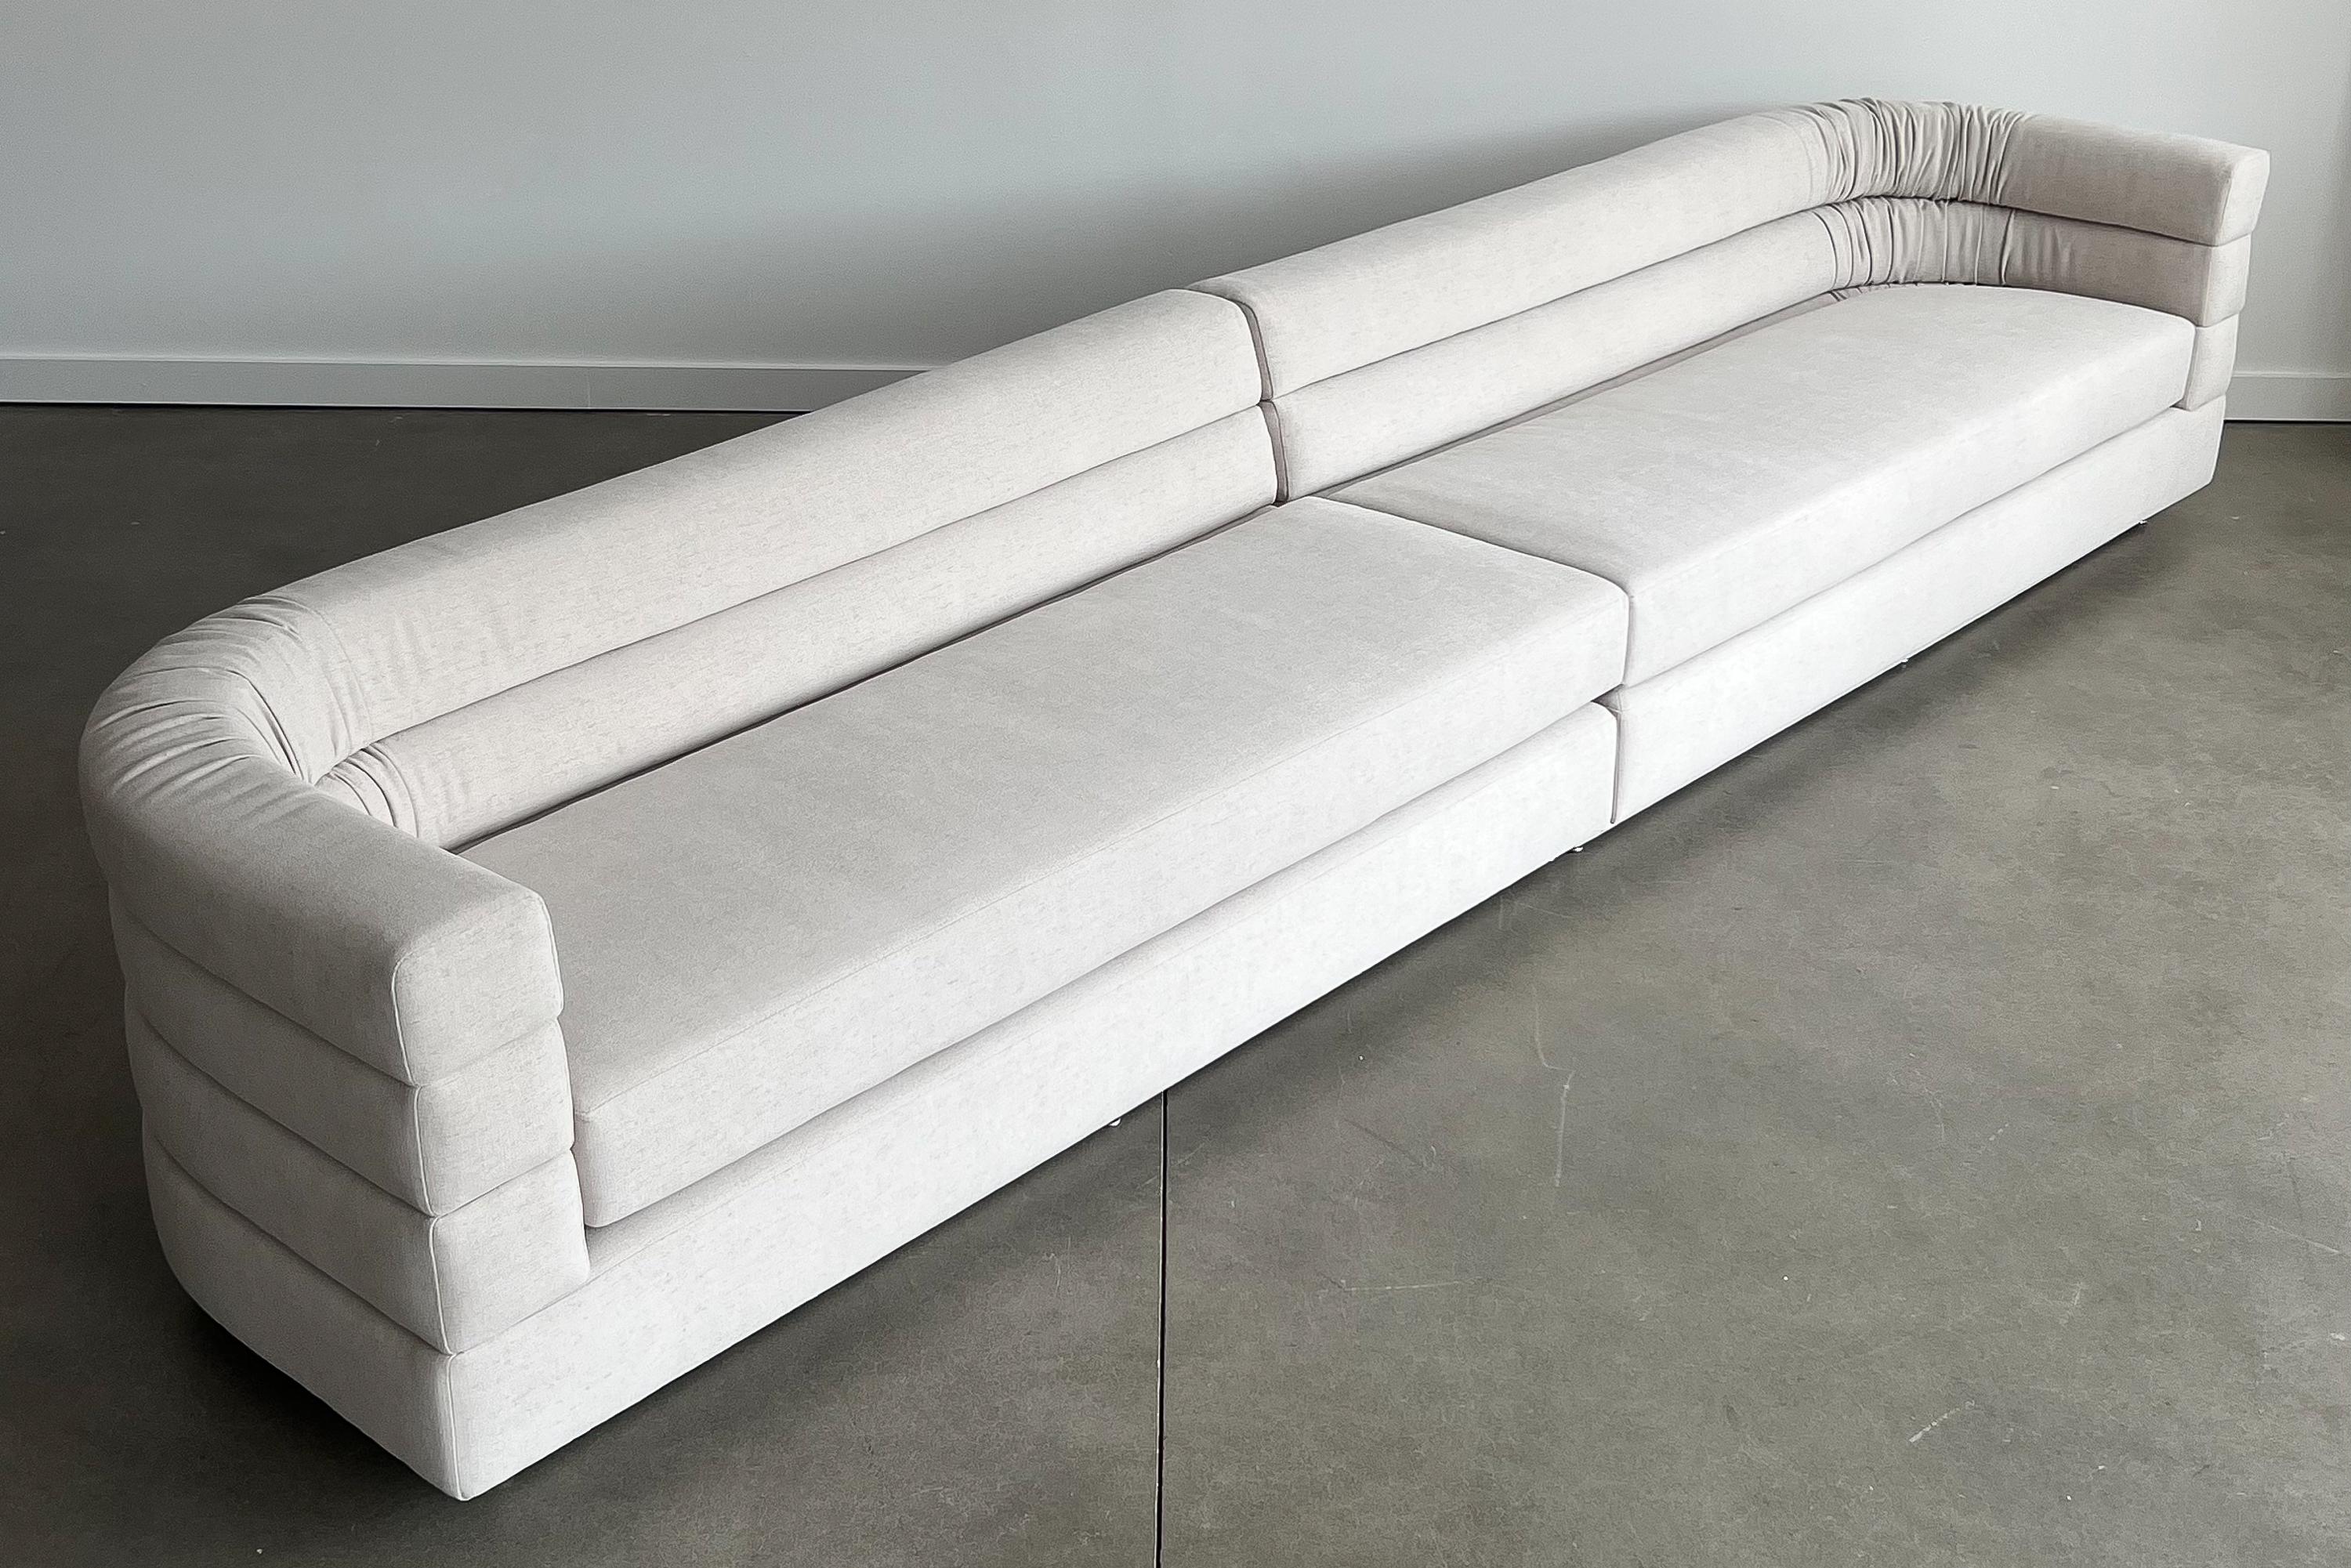 A dramatic 12 foot long two piece channeled sofa by Richard Himmel for Interior Crafts, circa 1970s. This sofa has been newly upholstered in a fine modern chenille fabric with all new foam throughout. The fabric is a pale bone color with gray